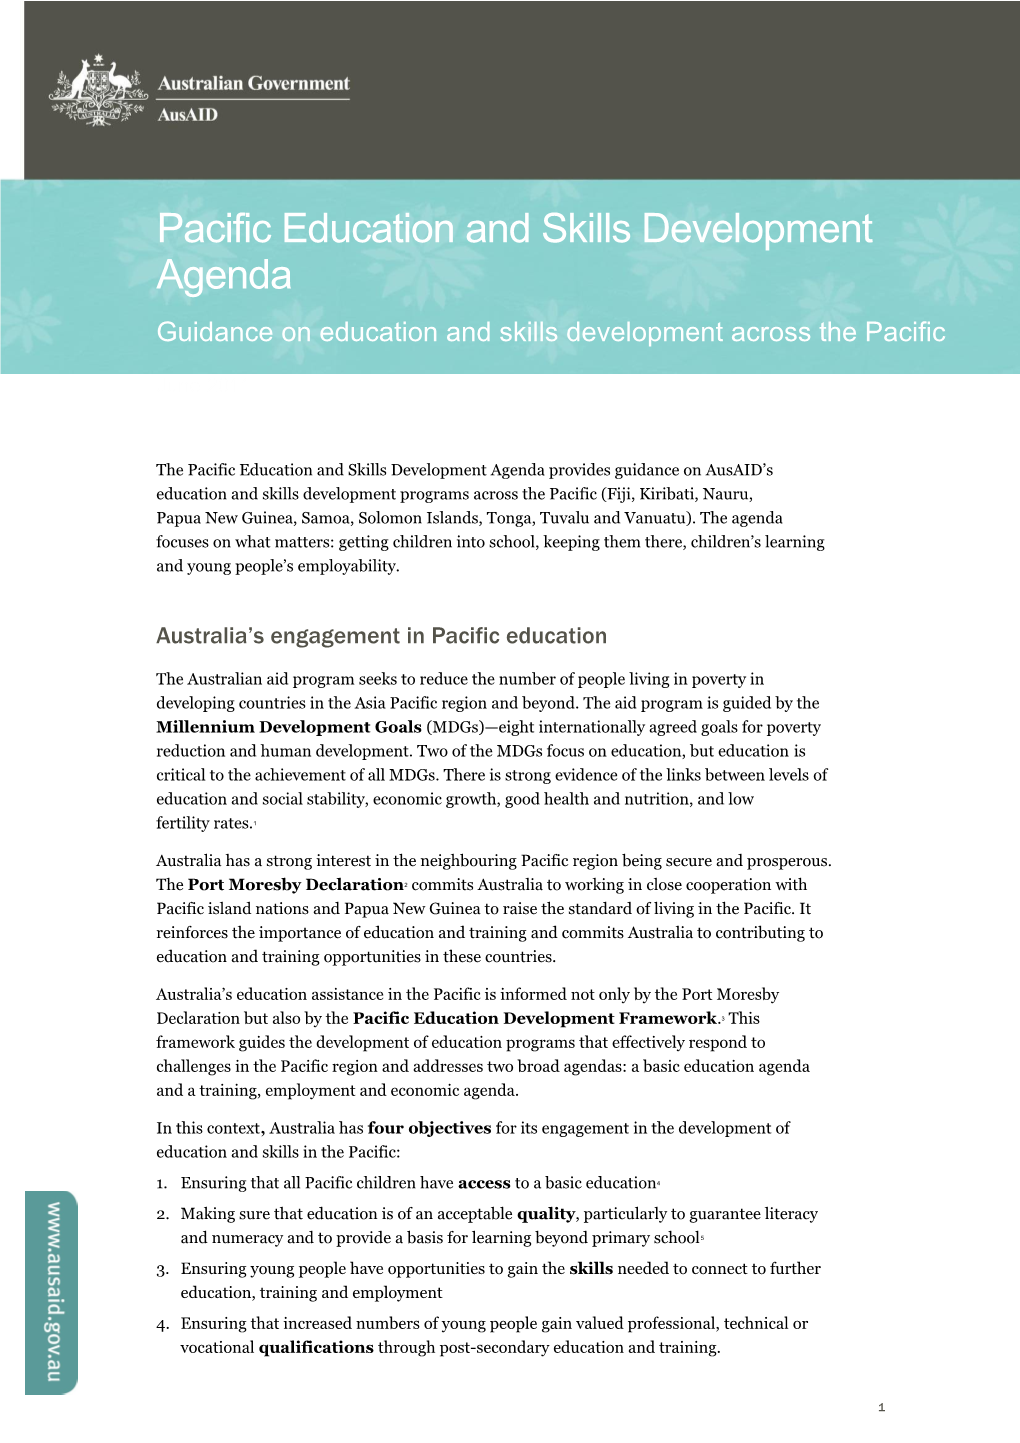 Guidance on Education and Skillsdevelopment Across the Pacific